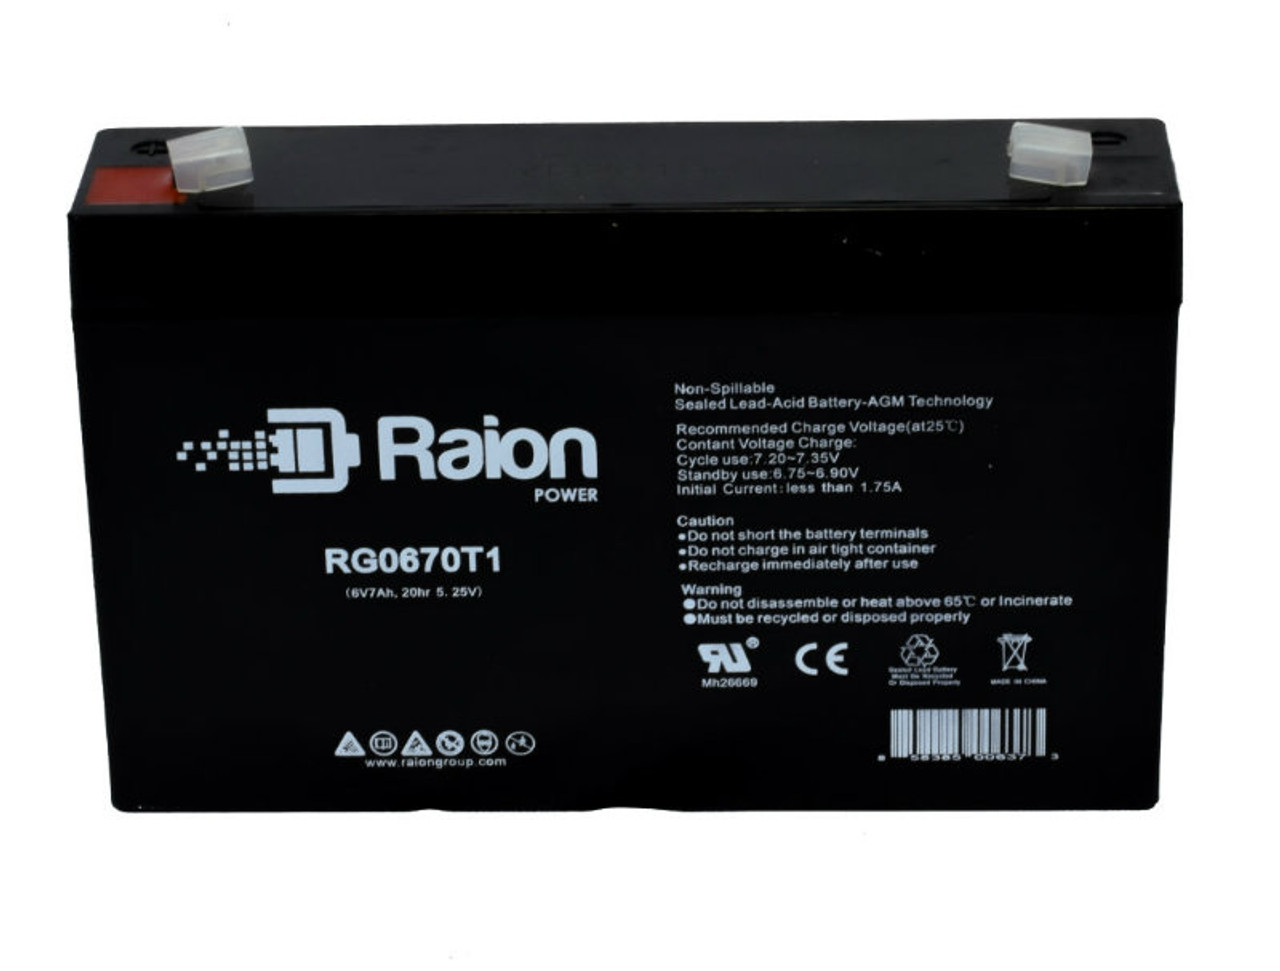 Raion Power RG0670T1 Replacement Battery Cartridge for Pace Tech Vitalmax Systems IV